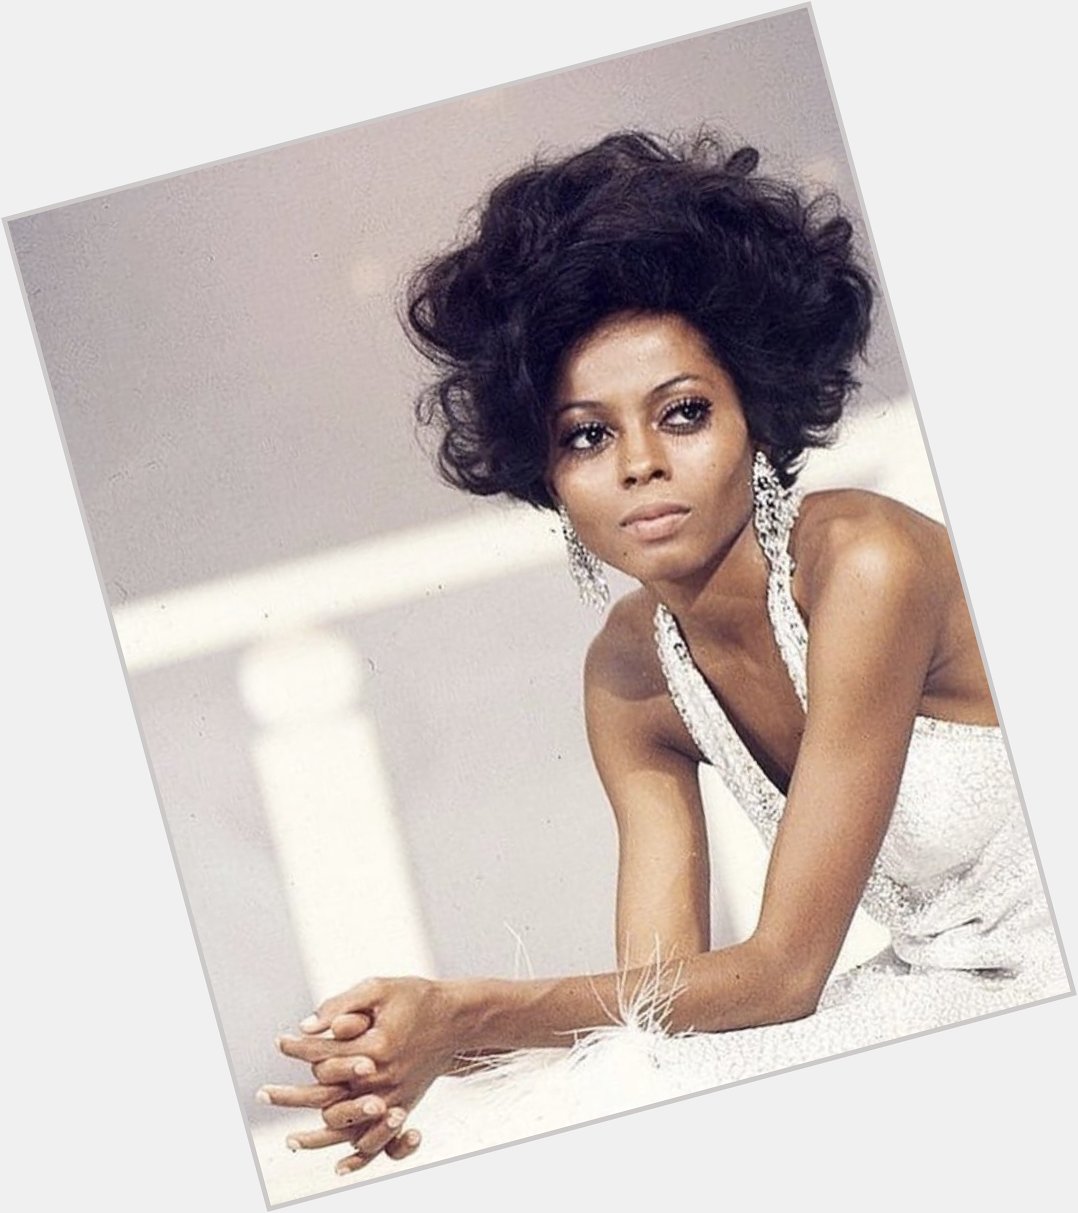 Happy 75th Birthday to our legendary fav Ms. Diana Ross  